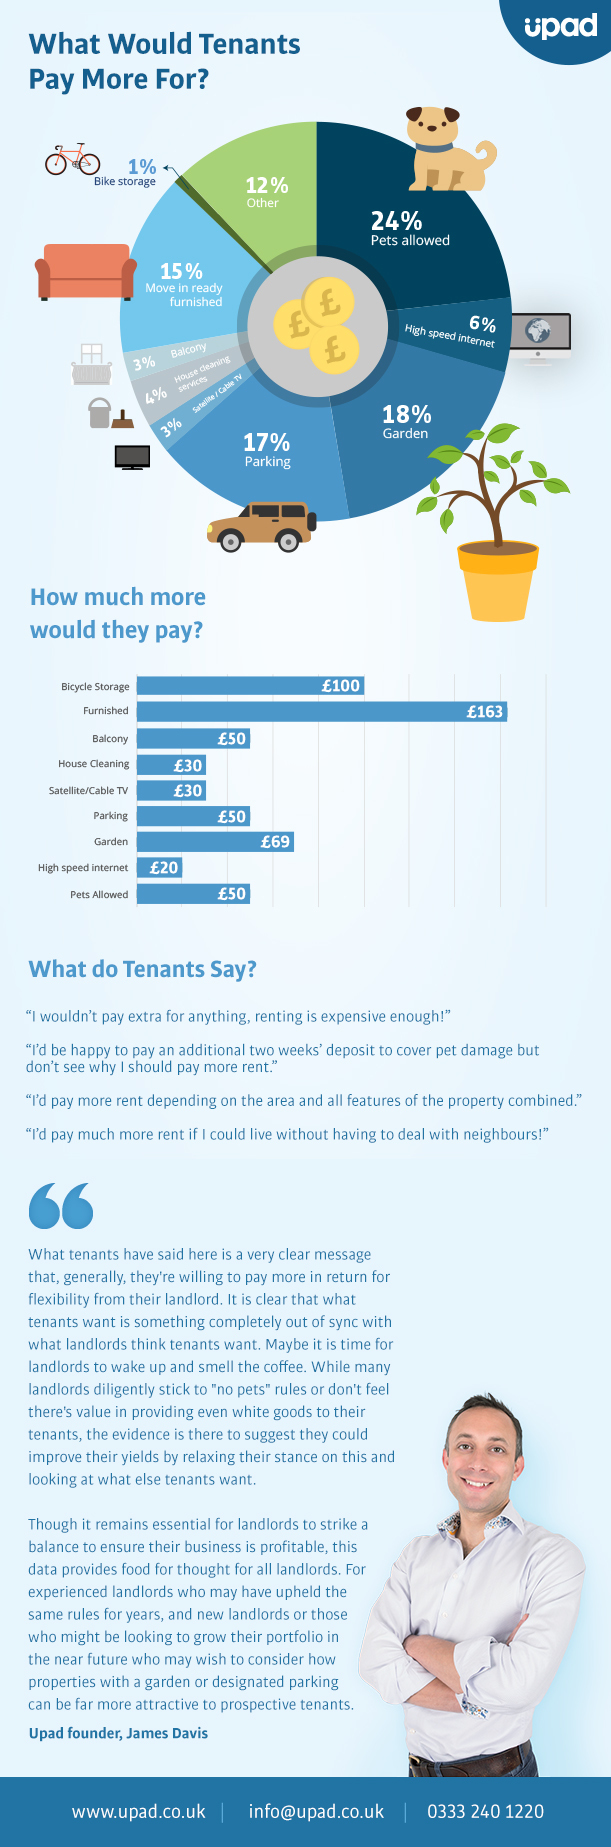 what would tenants pay more for infographic